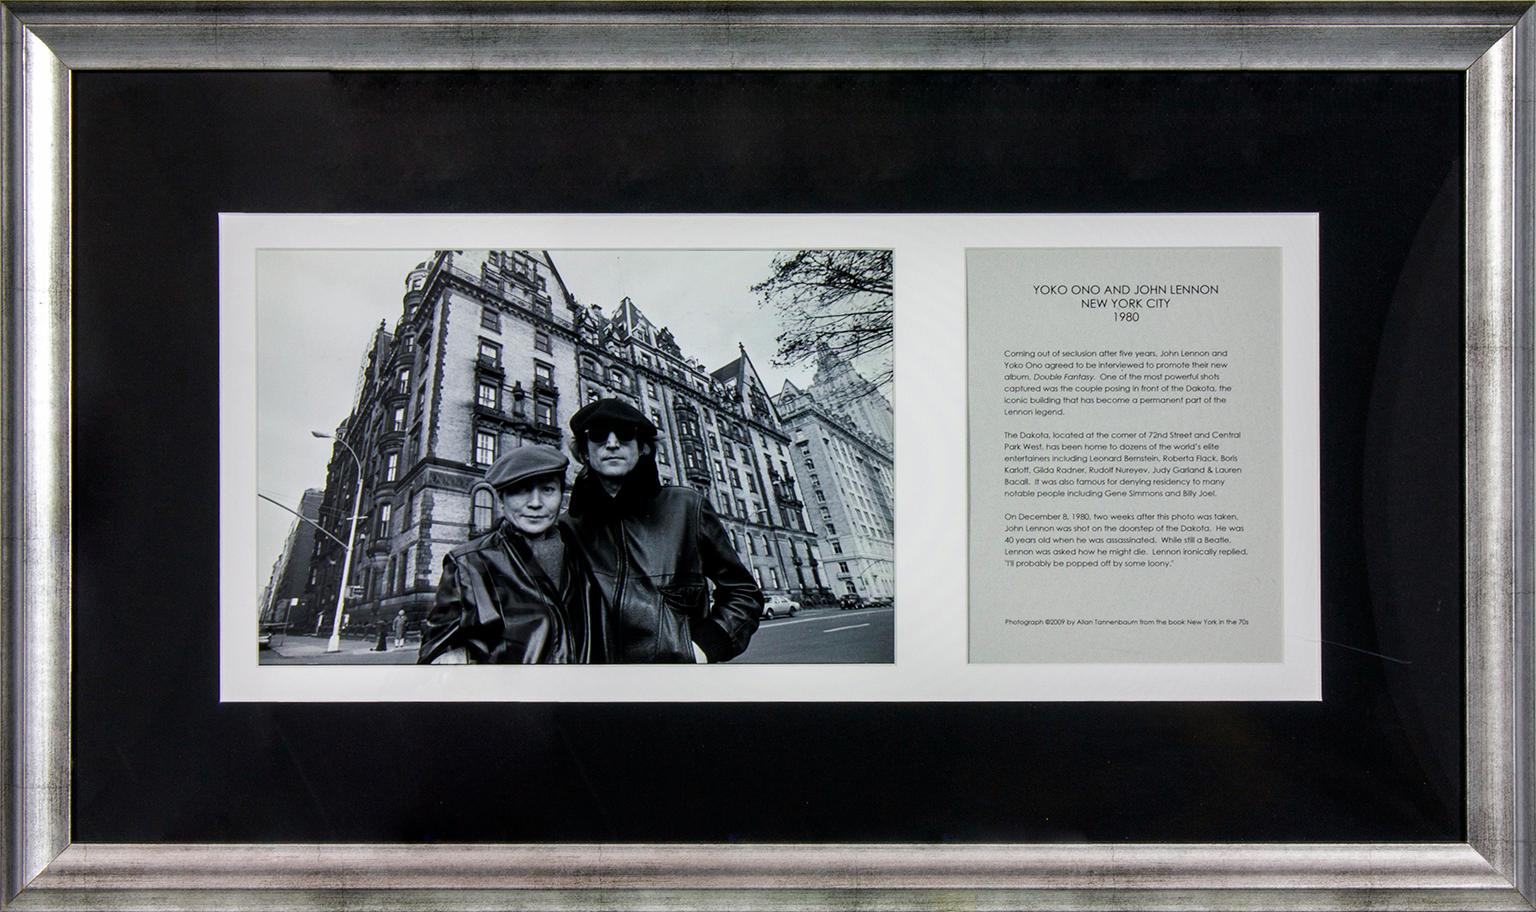 "John Lennon and Yoko Ono" photographed in front of the Dakota apartment in New York City in 1980 by Allan Tannenbaum, two weeks before Lennon's death. This framed photograph was previously displayed in a guest room at the original Hard Rock Hotel &